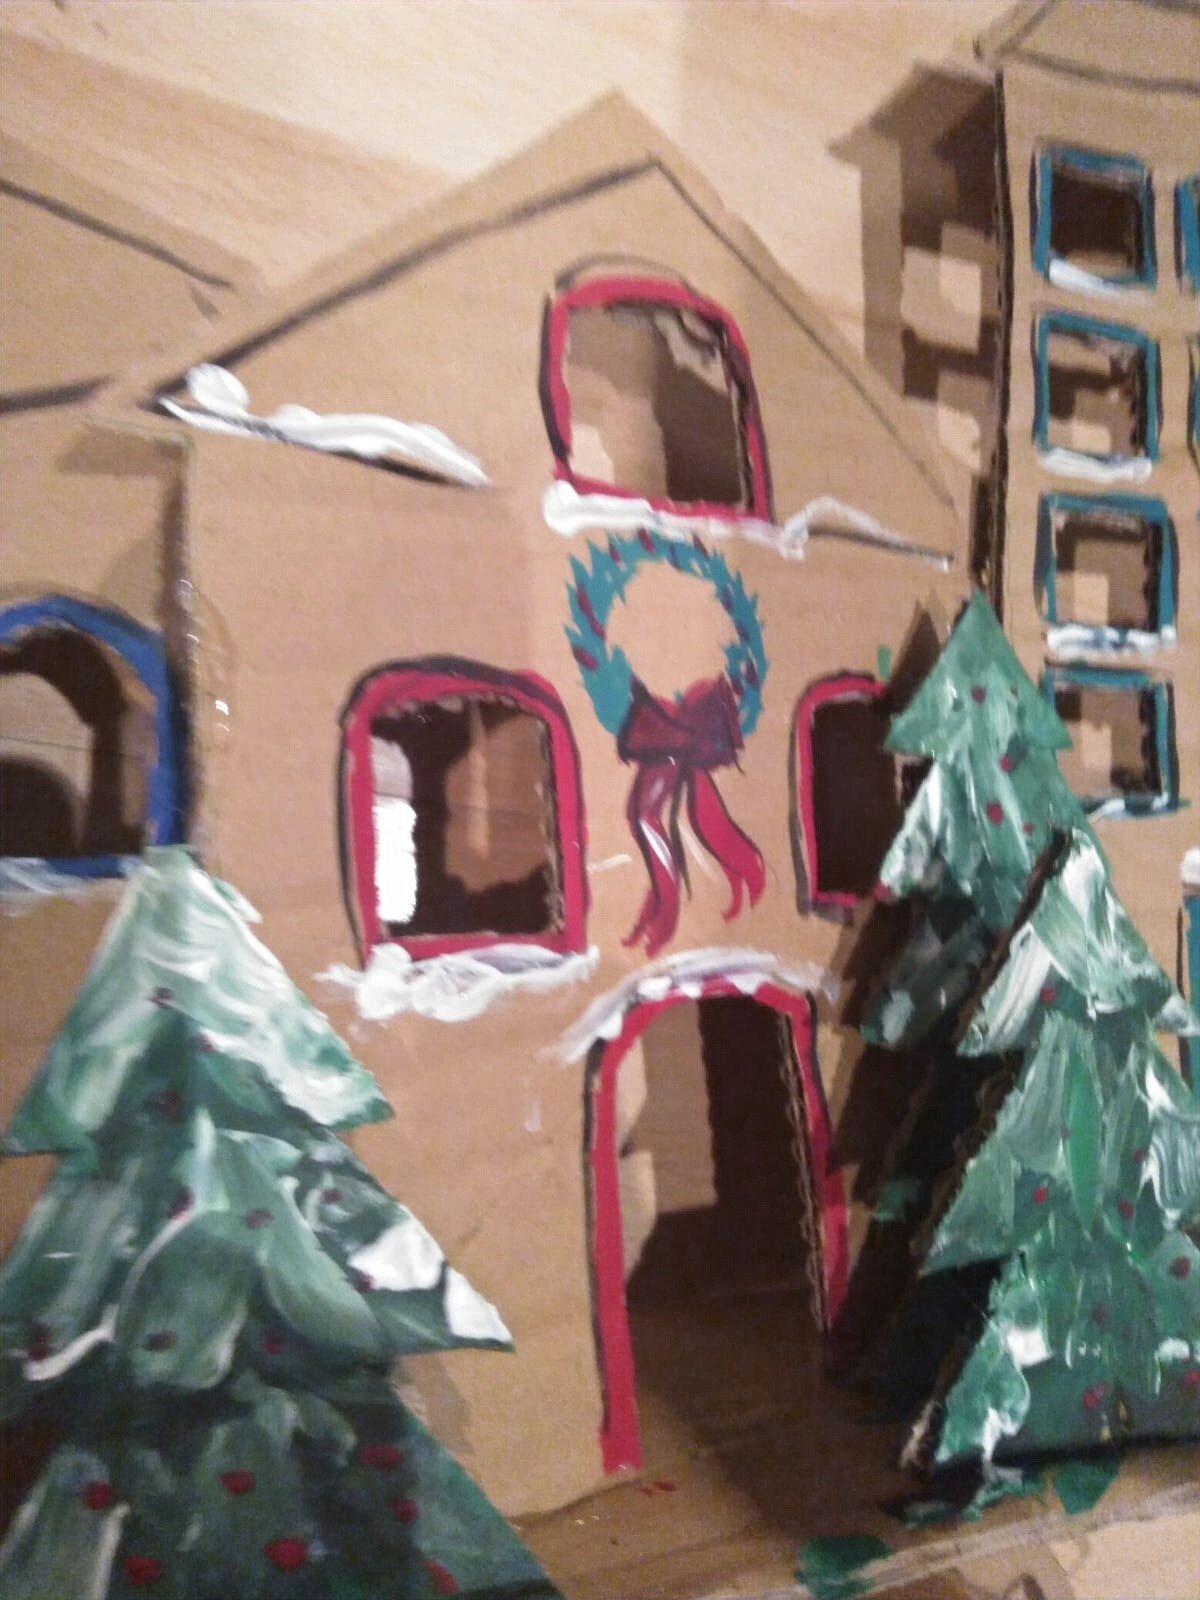 Cut out cardboard houses painted in a Christmas style